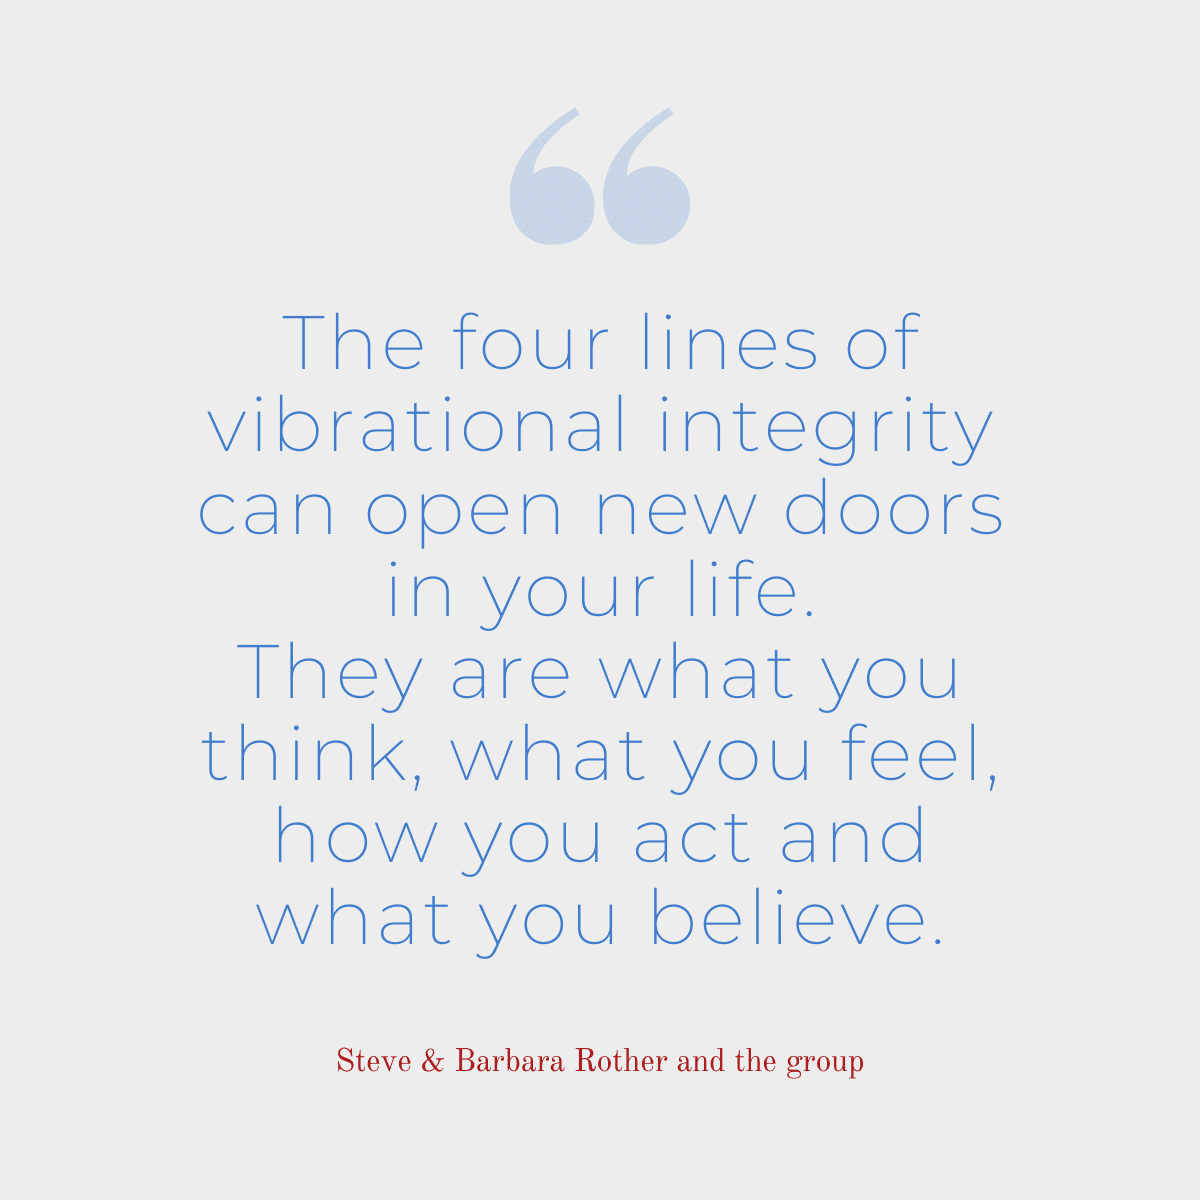 The four lines of vibrational integrity